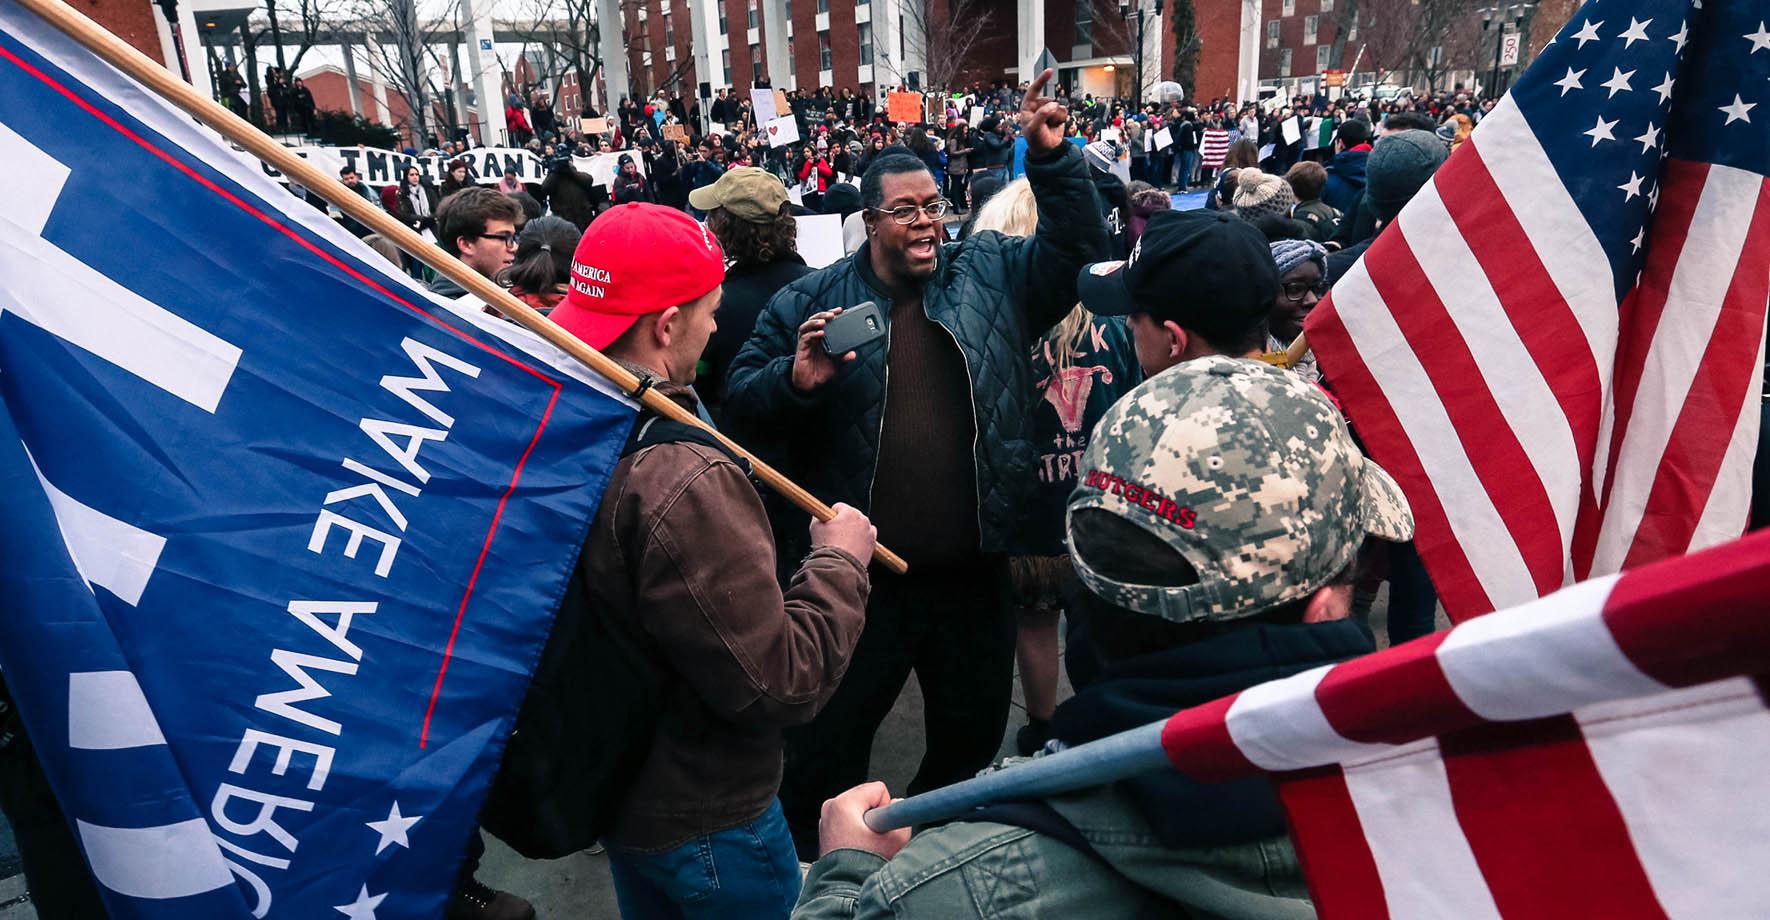 Daryle Lamont Jenkins argues with supporters of President Trump.